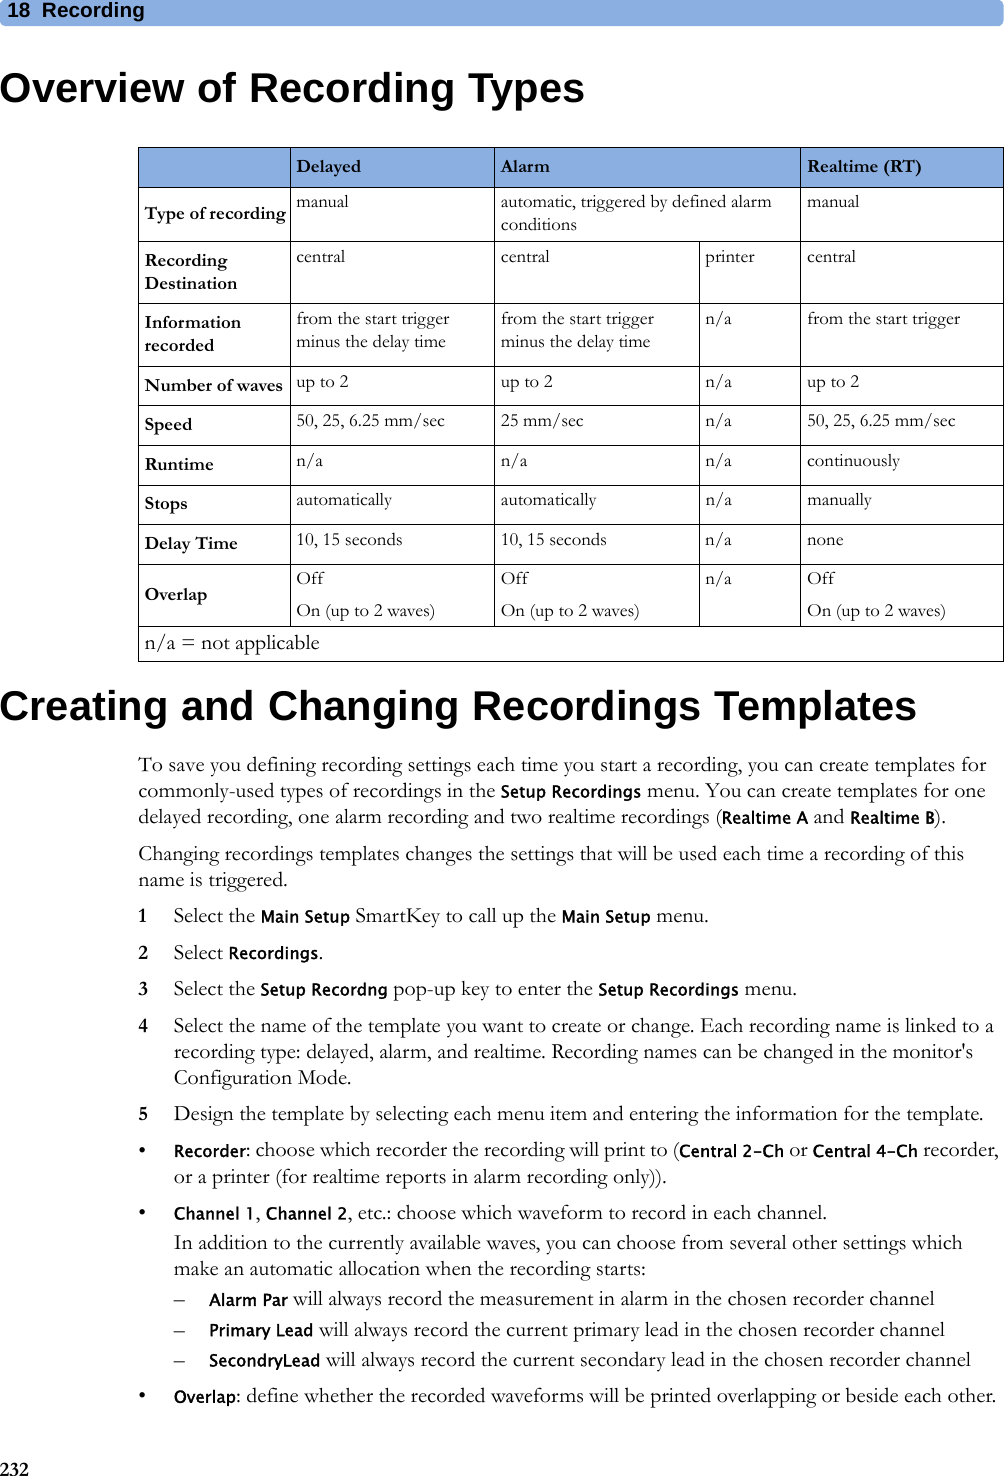 18 Recording232Overview of Recording TypesCreating and Changing Recordings TemplatesTo save you defining recording settings each time you start a recording, you can create templates for commonly-used types of recordings in the Setup Recordings menu. You can create templates for one delayed recording, one alarm recording and two realtime recordings (Realtime A and Realtime B).Changing recordings templates changes the settings that will be used each time a recording of this name is triggered.1Select the Main Setup SmartKey to call up the Main Setup menu.2Select Recordings.3Select the Setup Recordng pop-up key to enter the Setup Recordings menu.4Select the name of the template you want to create or change. Each recording name is linked to a recording type: delayed, alarm, and realtime. Recording names can be changed in the monitor&apos;s Configuration Mode.5Design the template by selecting each menu item and entering the information for the template.•Recorder: choose which recorder the recording will print to (Central 2-Ch or Central 4-Ch recorder, or a printer (for realtime reports in alarm recording only)). •Channel 1, Channel 2, etc.: choose which waveform to record in each channel.In addition to the currently available waves, you can choose from several other settings which make an automatic allocation when the recording starts:–Alarm Par will always record the measurement in alarm in the chosen recorder channel–Primary Lead will always record the current primary lead in the chosen recorder channel–SecondryLead will always record the current secondary lead in the chosen recorder channel•Overlap: define whether the recorded waveforms will be printed overlapping or beside each other.Delayed Alarm Realtime (RT)Type of recording manual automatic, triggered by defined alarm conditionsmanualRecording Destinationcentral central printer centralInformation recordedfrom the start trigger minus the delay timefrom the start trigger minus the delay timen/a from the start triggerNumber of waves up to 2 up to 2 n/a up to 2Speed 50, 25, 6.25 mm/sec 25 mm/sec n/a 50, 25, 6.25 mm/secRuntime n/a n/a n/a continuouslyStops automatically automatically n/a manuallyDelay Time 10, 15 seconds 10, 15 seconds n/a noneOverlap OffOn (up to 2 waves)OffOn (up to 2 waves)n/a OffOn (up to 2 waves)n/a = not applicable